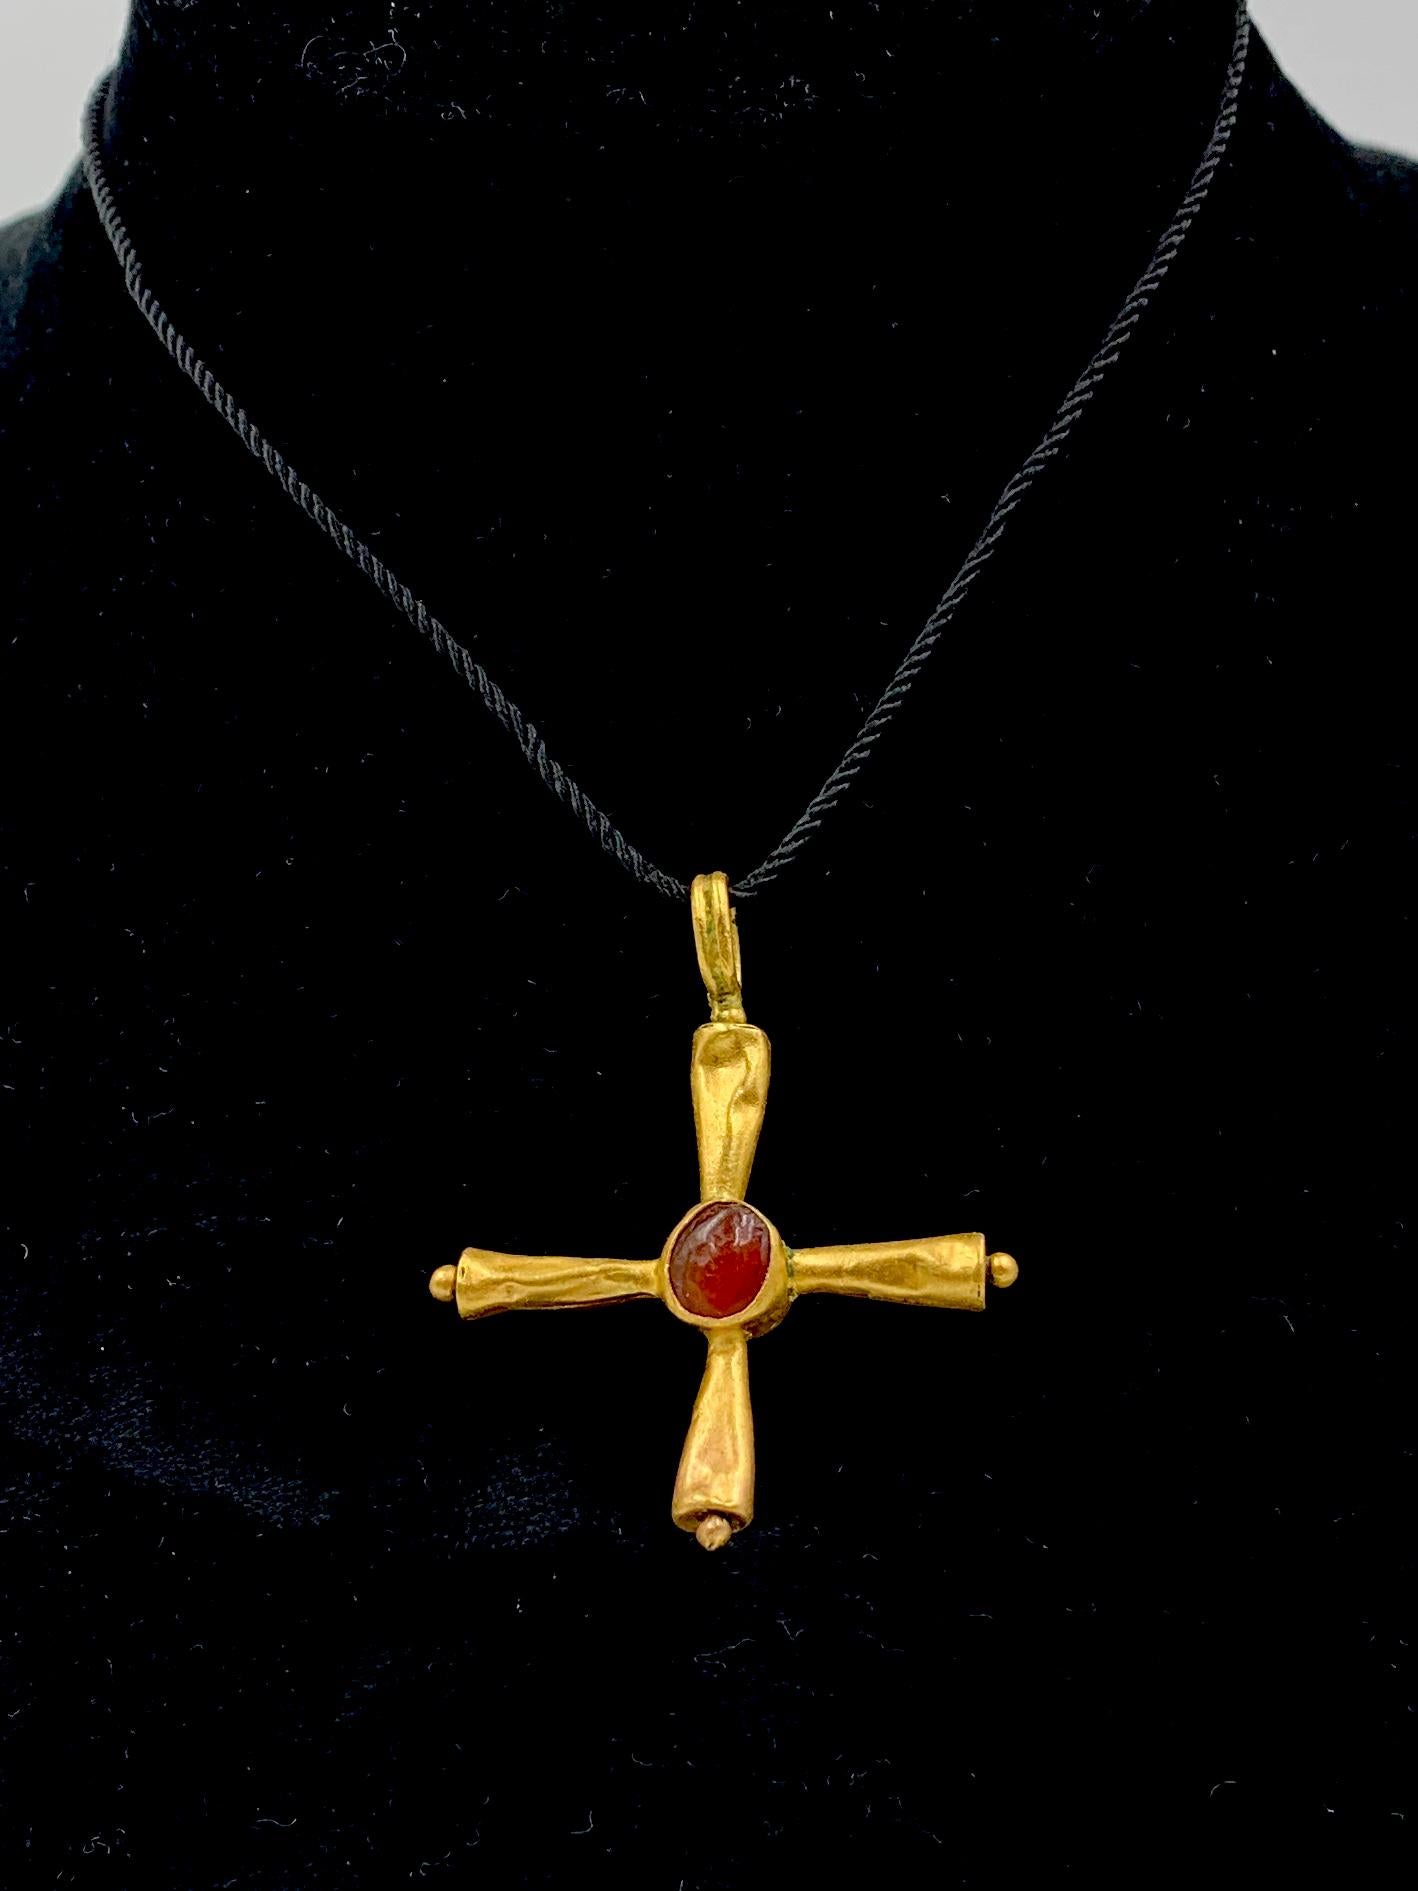 The shape and form of this rare cross is known as Thor's Cross or the Cross of Cuthbert, a Celtic Christian associated with the Kingdom of Northumbria and Southern Scotland. After his death, Cuthbert became the most revered saint of Northern